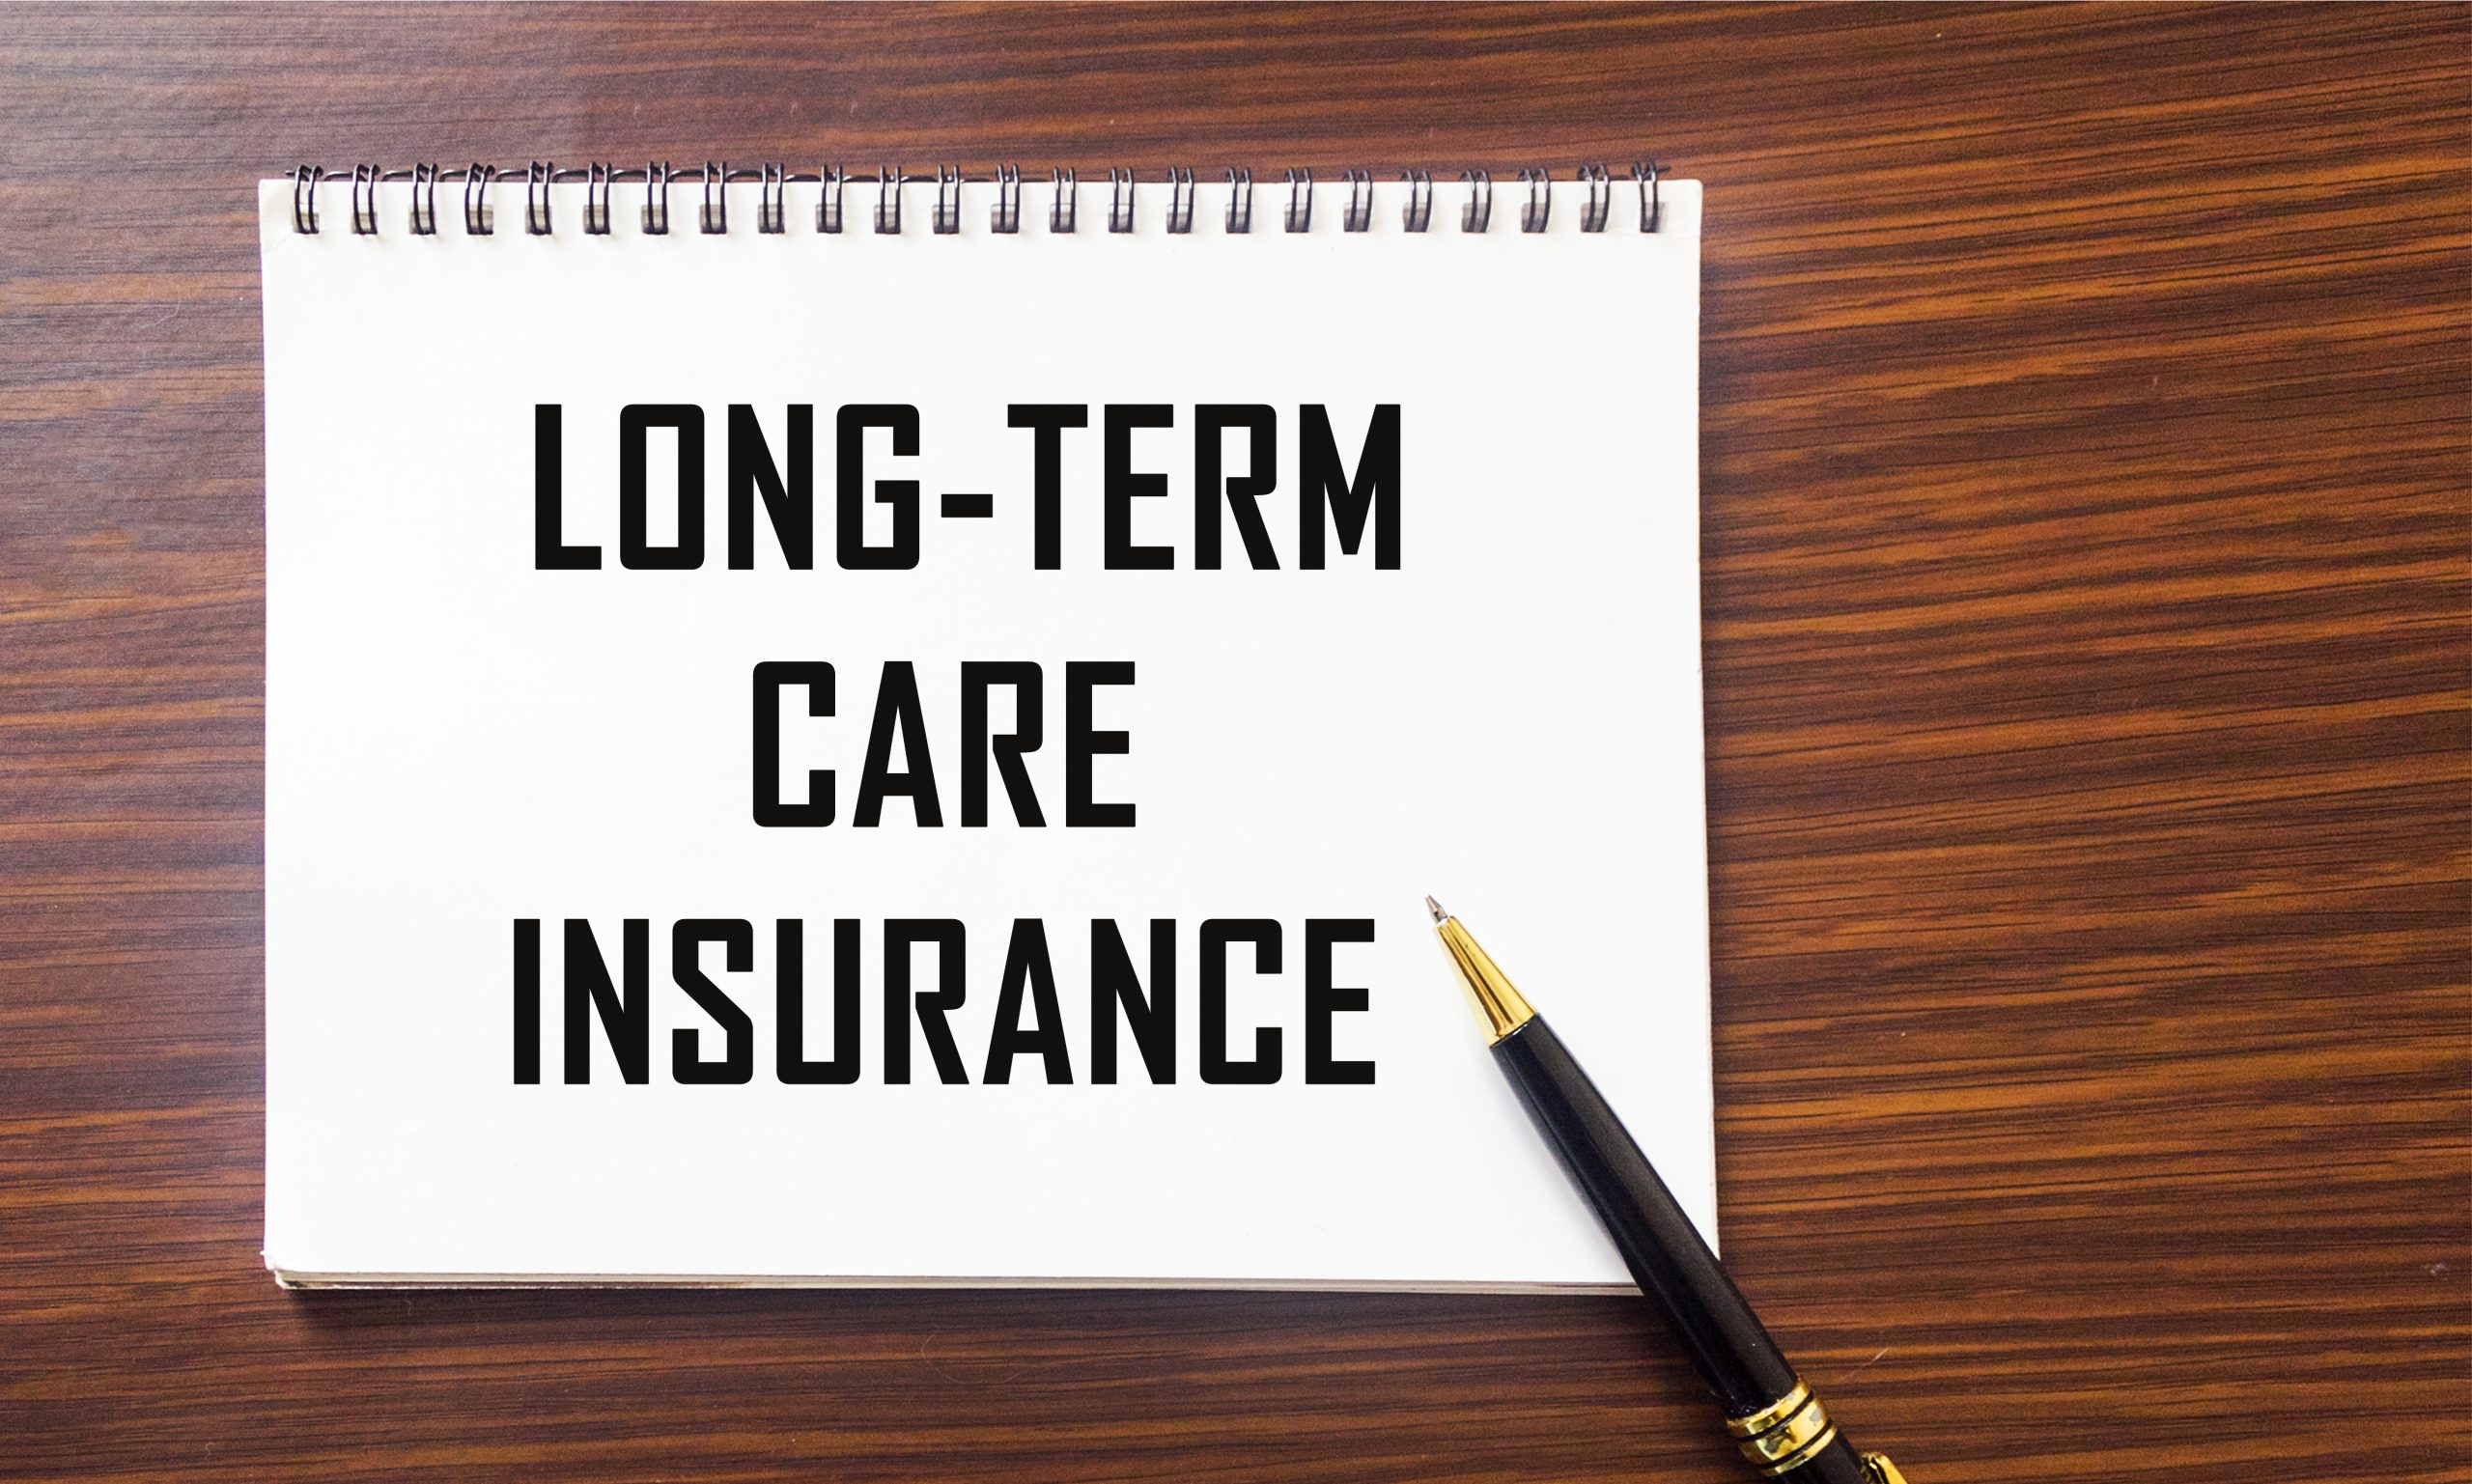 LONG TERM CARE INSURANCE information close-up written on a notepad and a wooden background. Medical concept